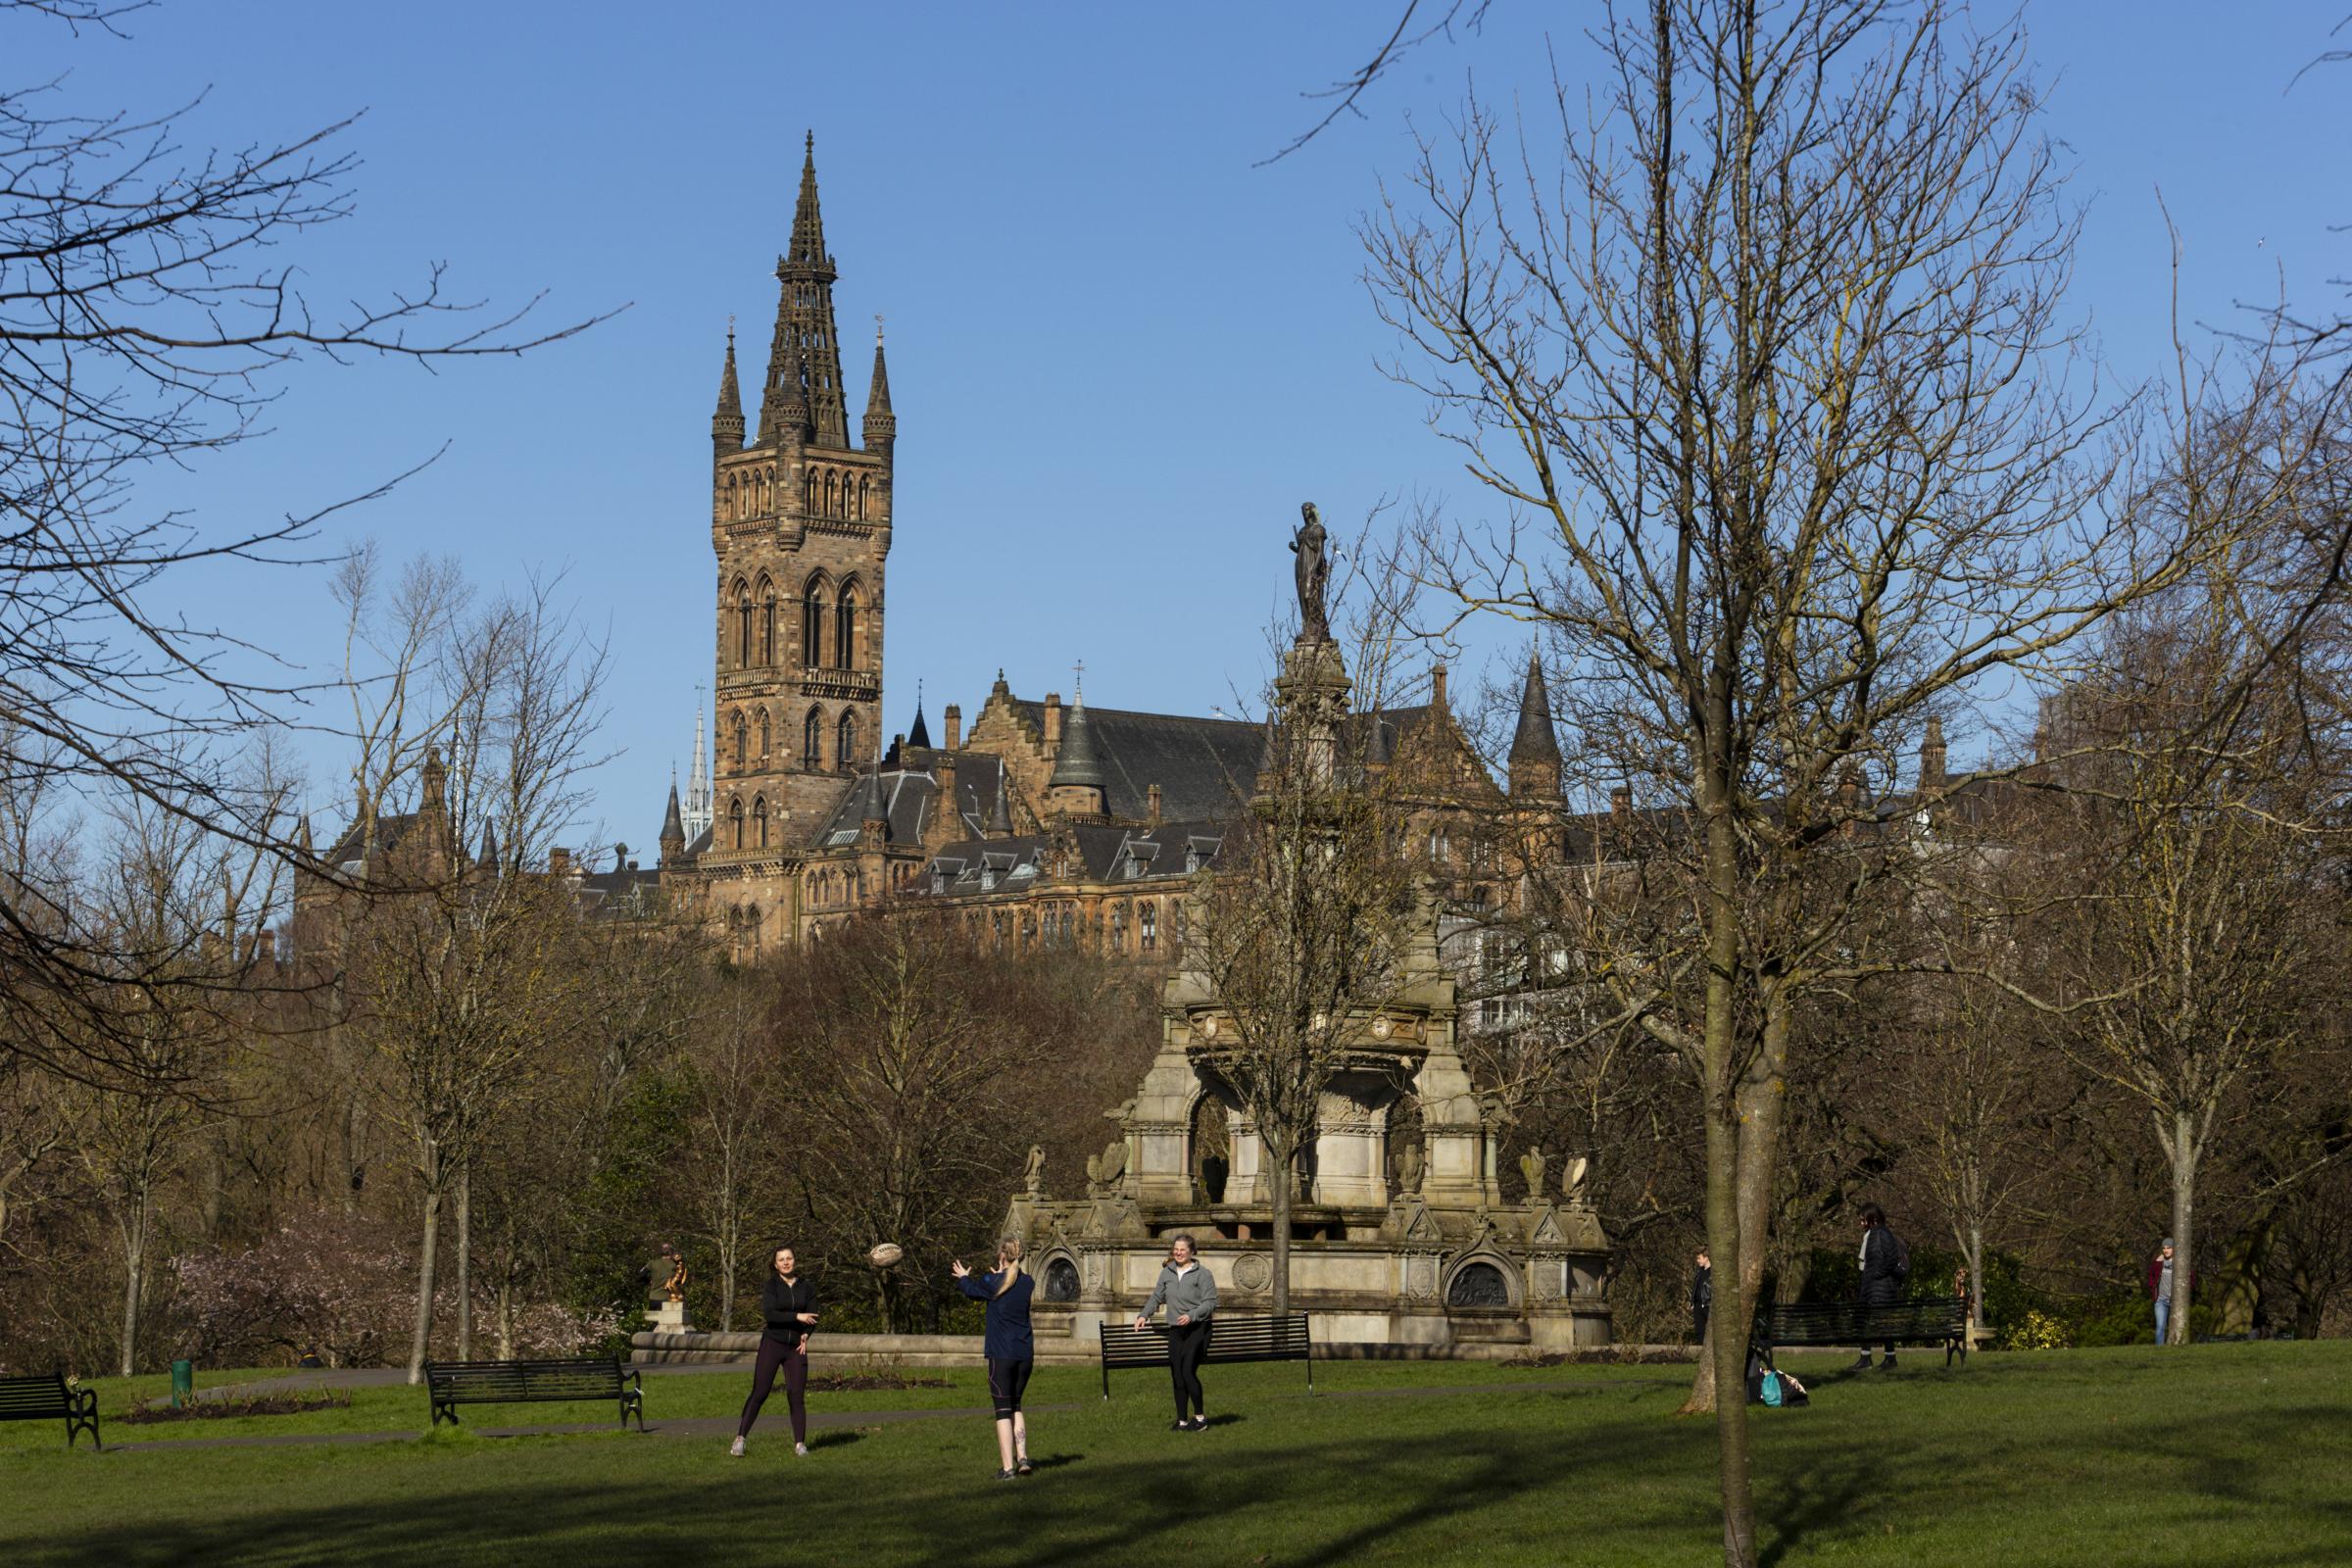 Calls to make Glasgow’s parks safer with lighting to go before the council